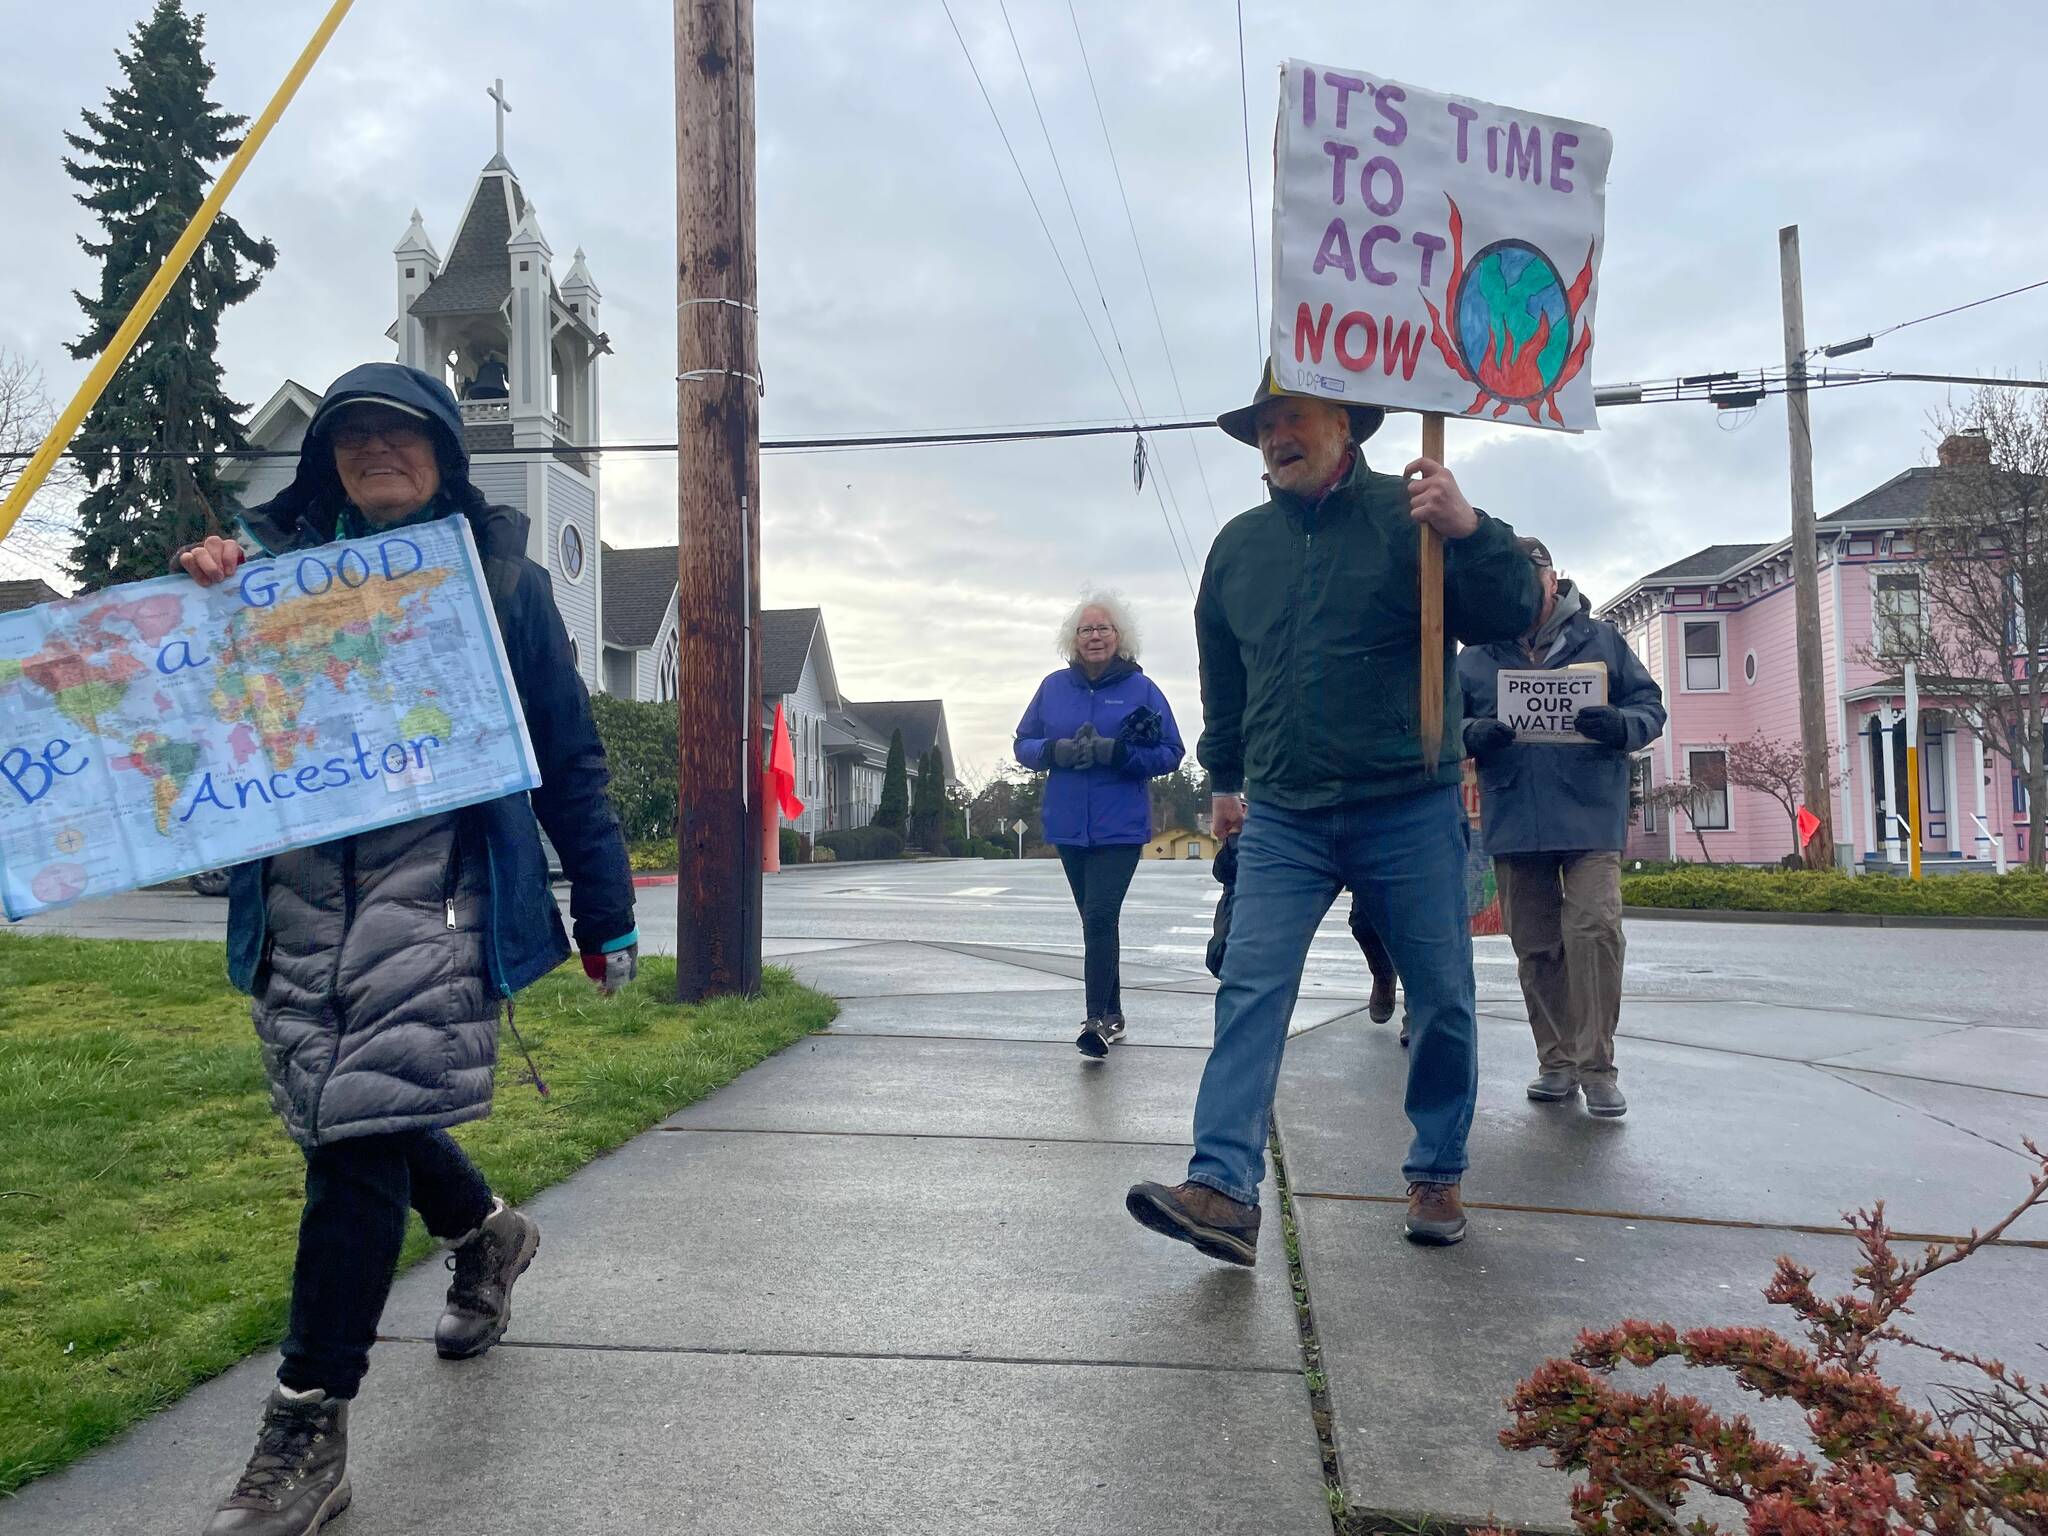 Students and community activists rally in Coupeville March 24 to voice their support for a county climate emergency declaration. (Photo provided)